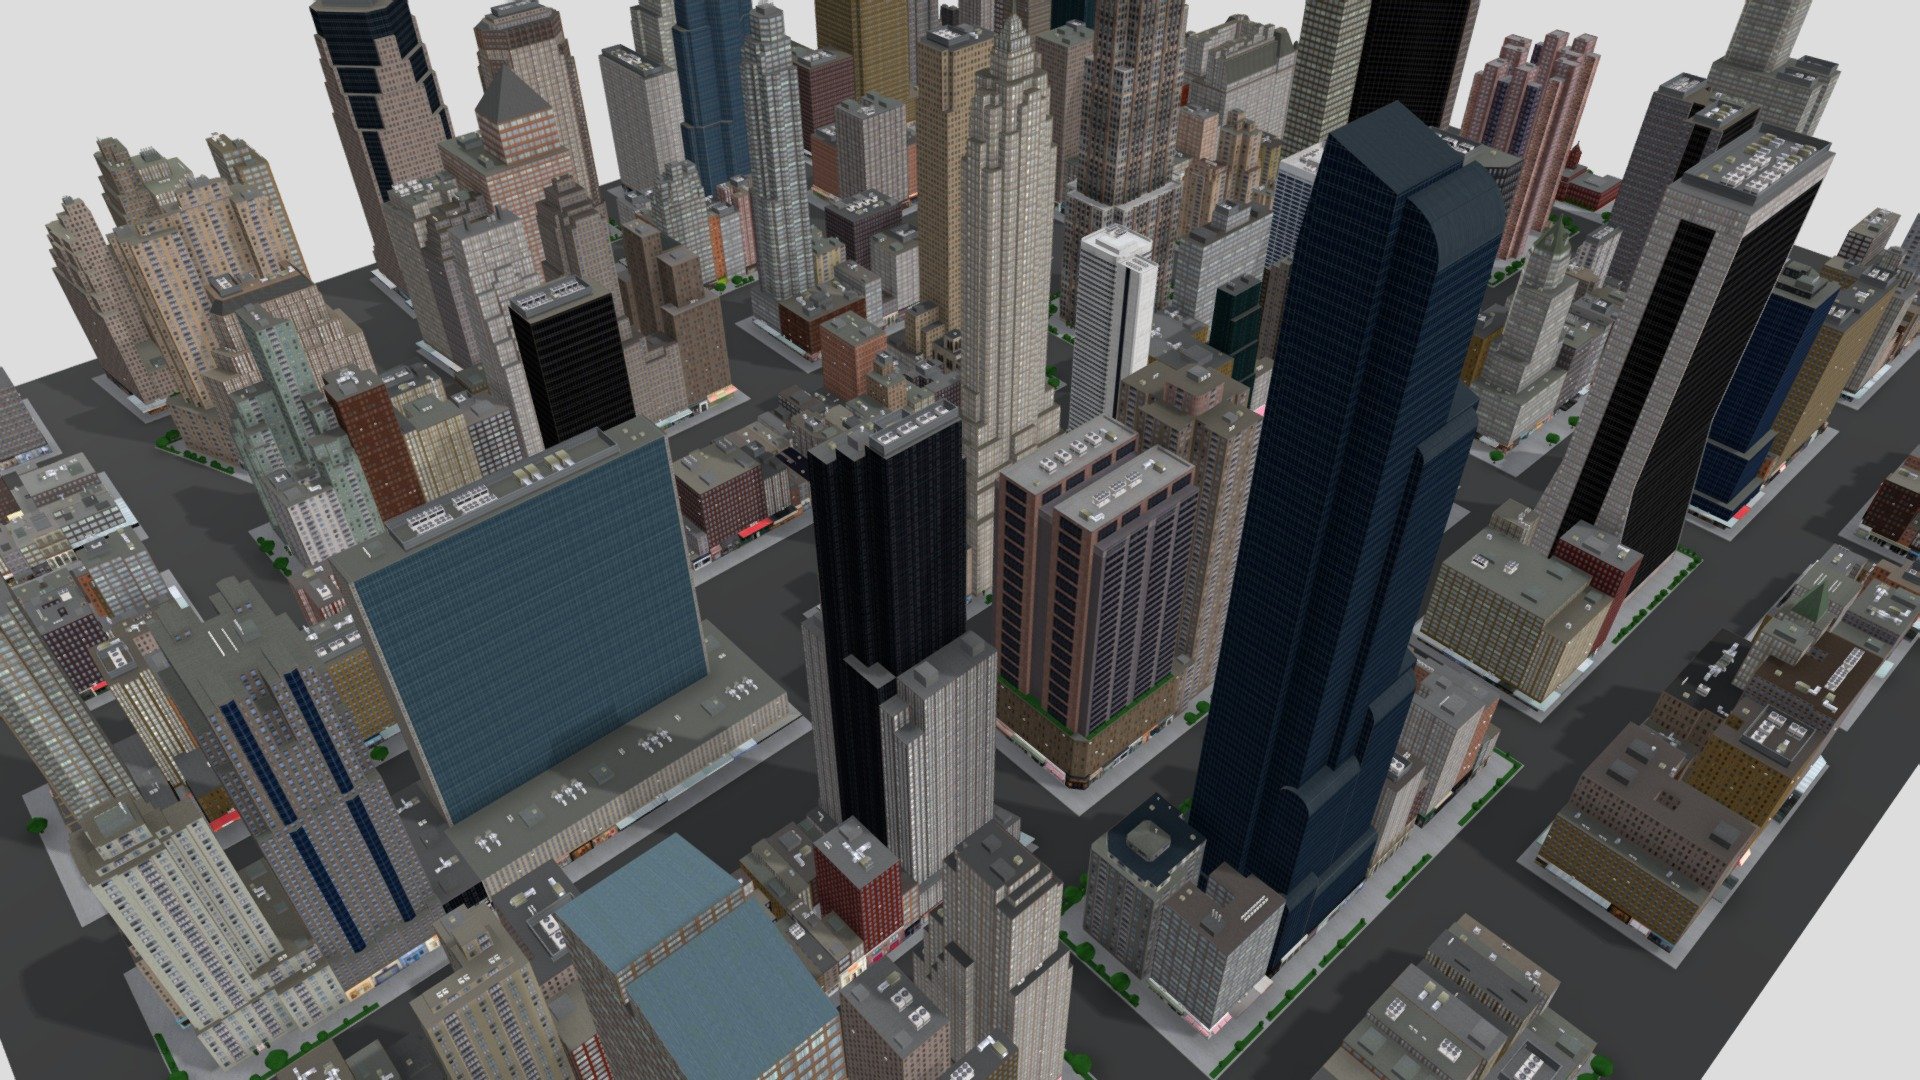 44 low-poly city block models perfect for projects like games and VR. The models have been based on New York City and include famous landmarks like the Empire State Building, Plaza Hotel, and others. Be sure to switch the sketchfab viewer to HD textures 3d model